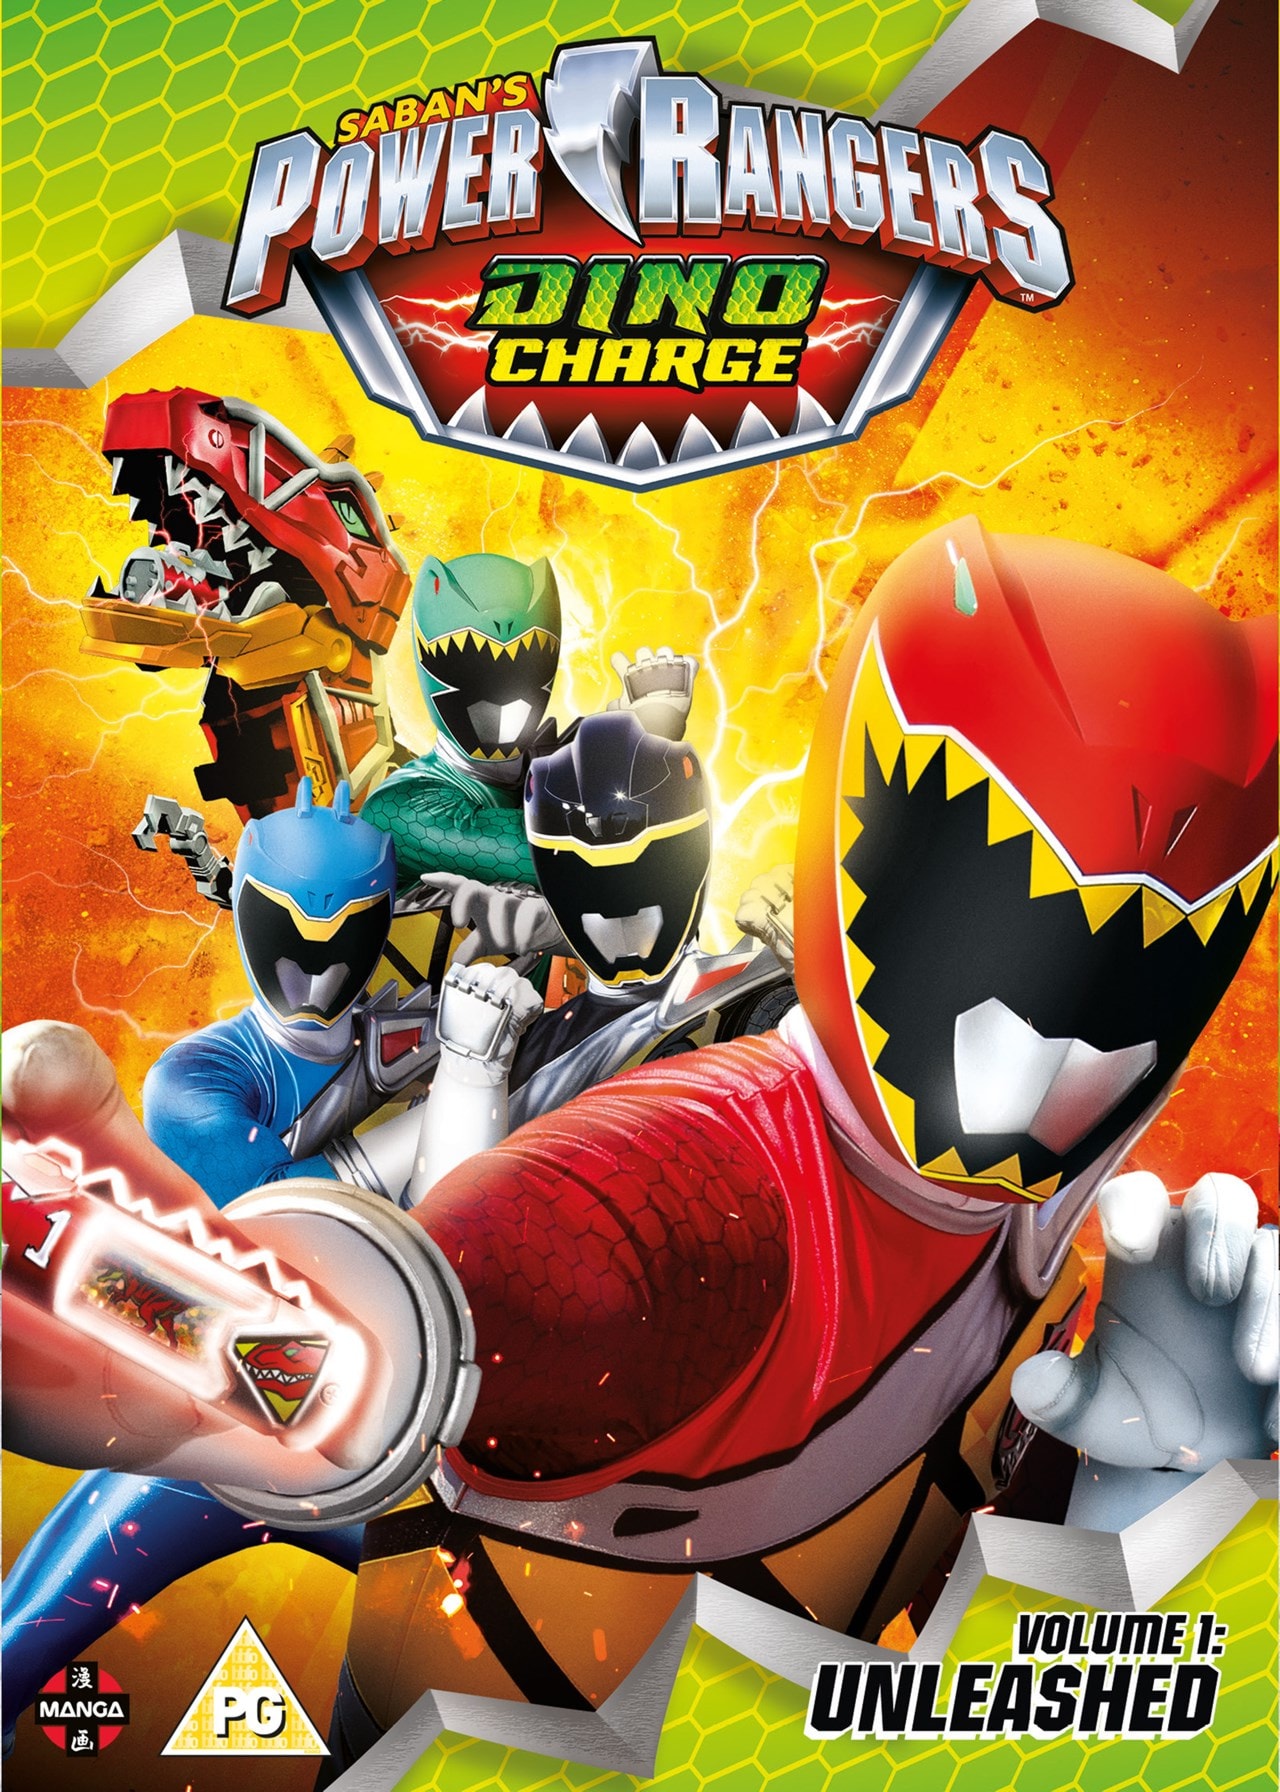 Power Rangers Dino Charge: Volume 1 - Unleashed | DVD | Free shipping ...